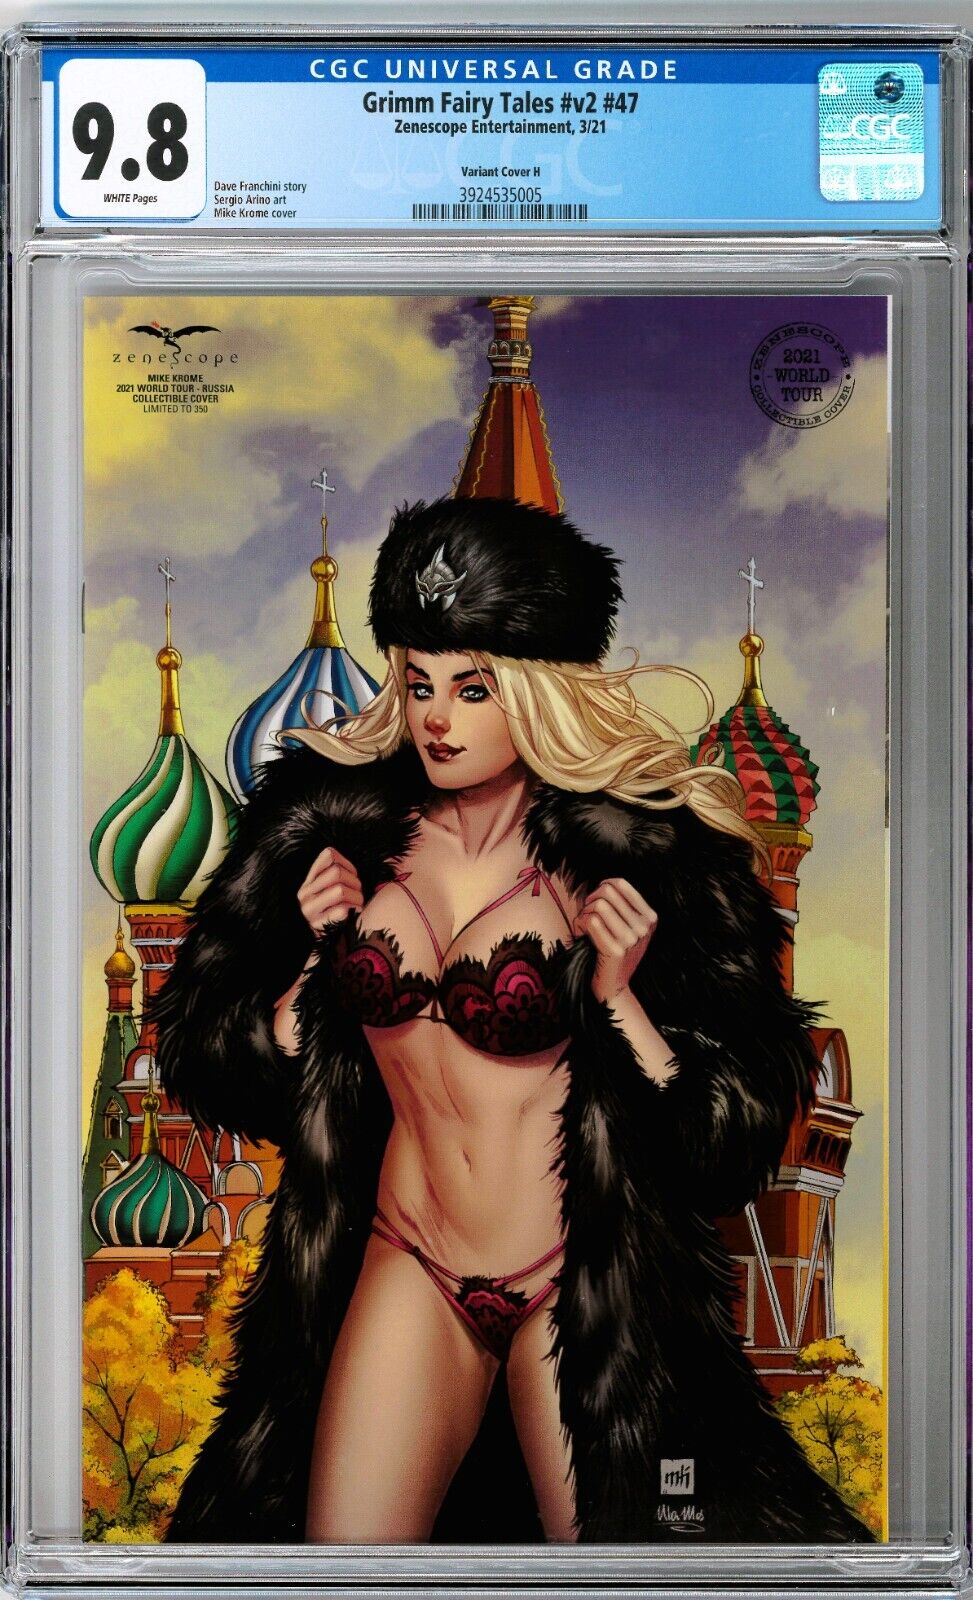 Grimm Fairy Tales v2 #47 CGC 9.8 (Mar 2021, Zenescope) Mike Krome Russia Cover H